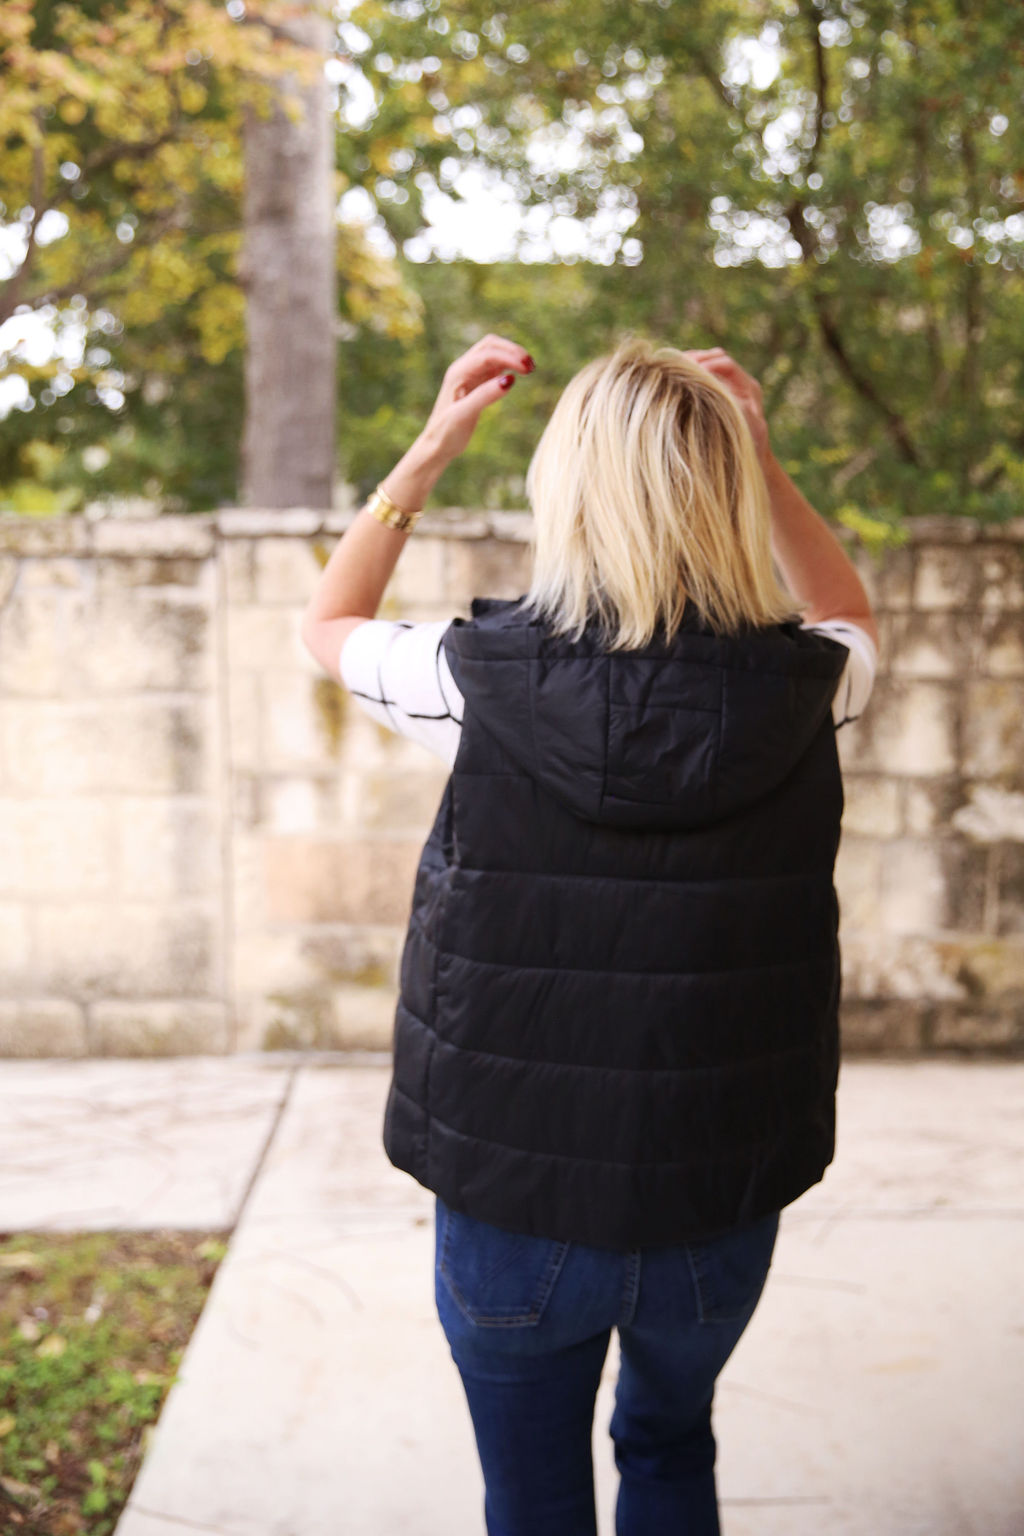 Padded Vest with Removable Hood